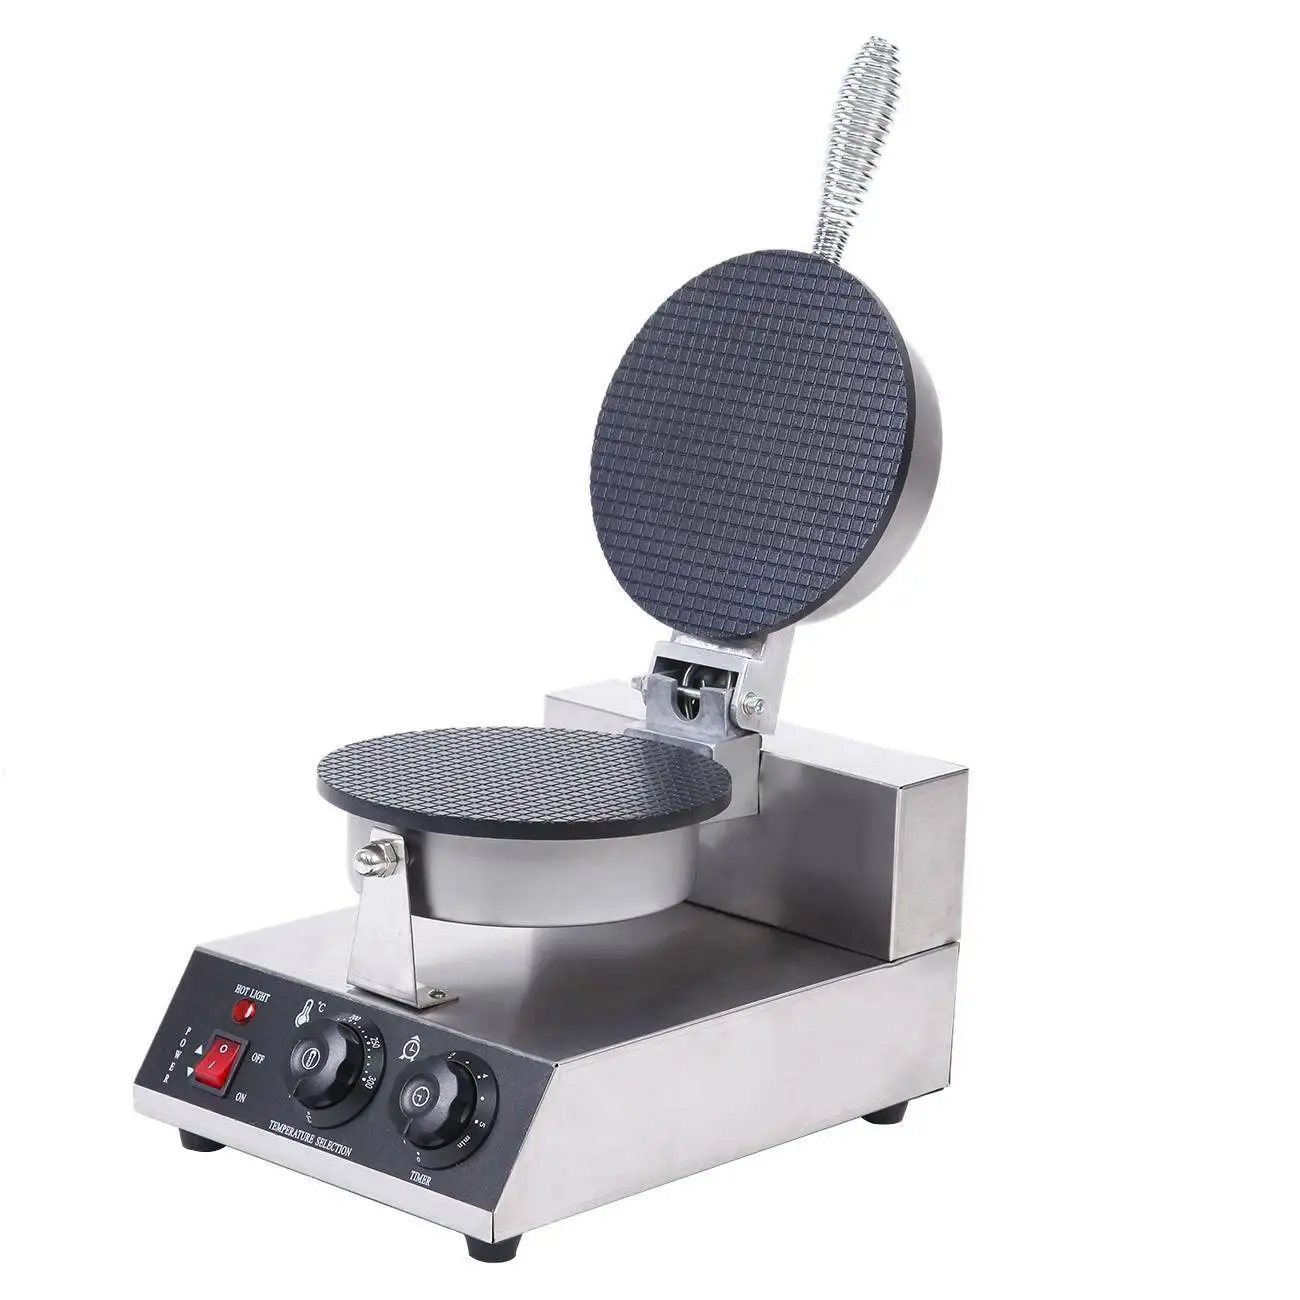 

Honhill Waffle Cone Baker Maker Machine 110v Electric Commercial Round Nonstick Stroopwafel Syrup Ice Cream Waffle Maker Machine